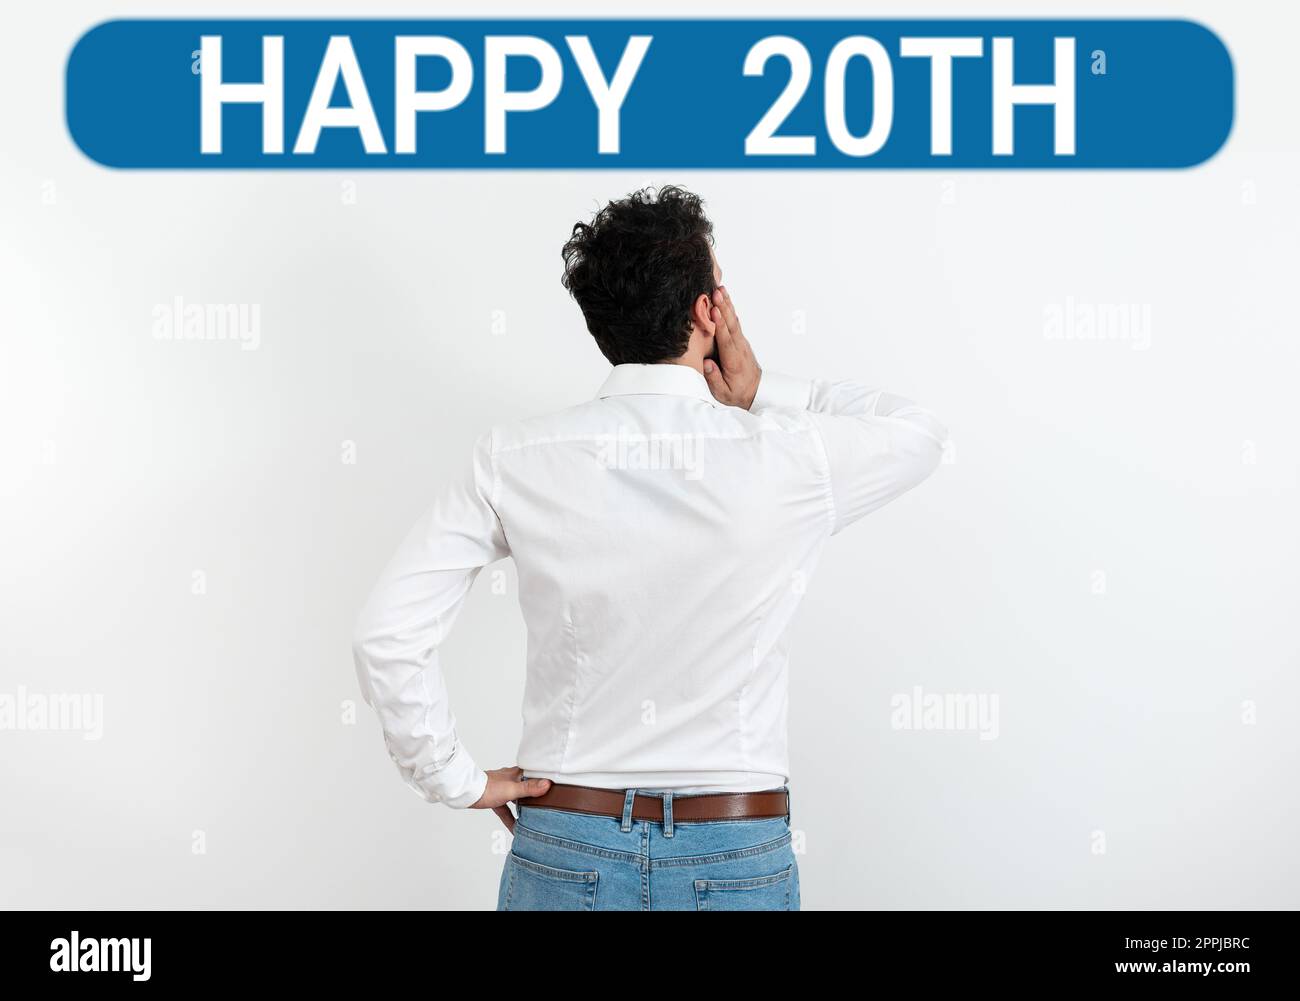 Text caption presenting Happy 20Th. Business approach a joyful occasion for special event to mark the 20th year Stock Photo